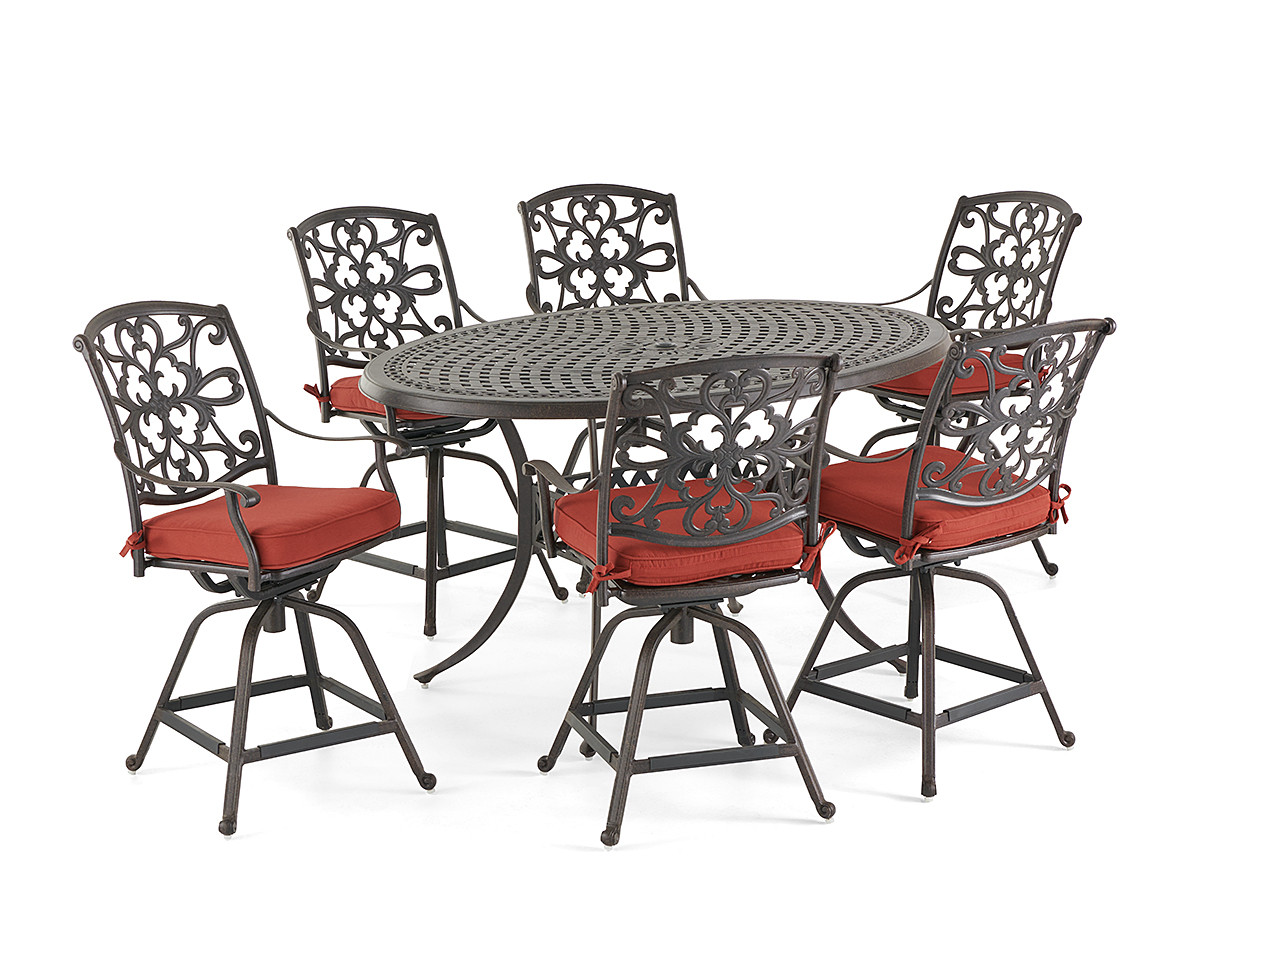 Carlisle Aged Bronze Cast Aluminum and Canvas Henna Cushion 7 Pc. Gathering Height Dining Set with 66 x 44 in. Table